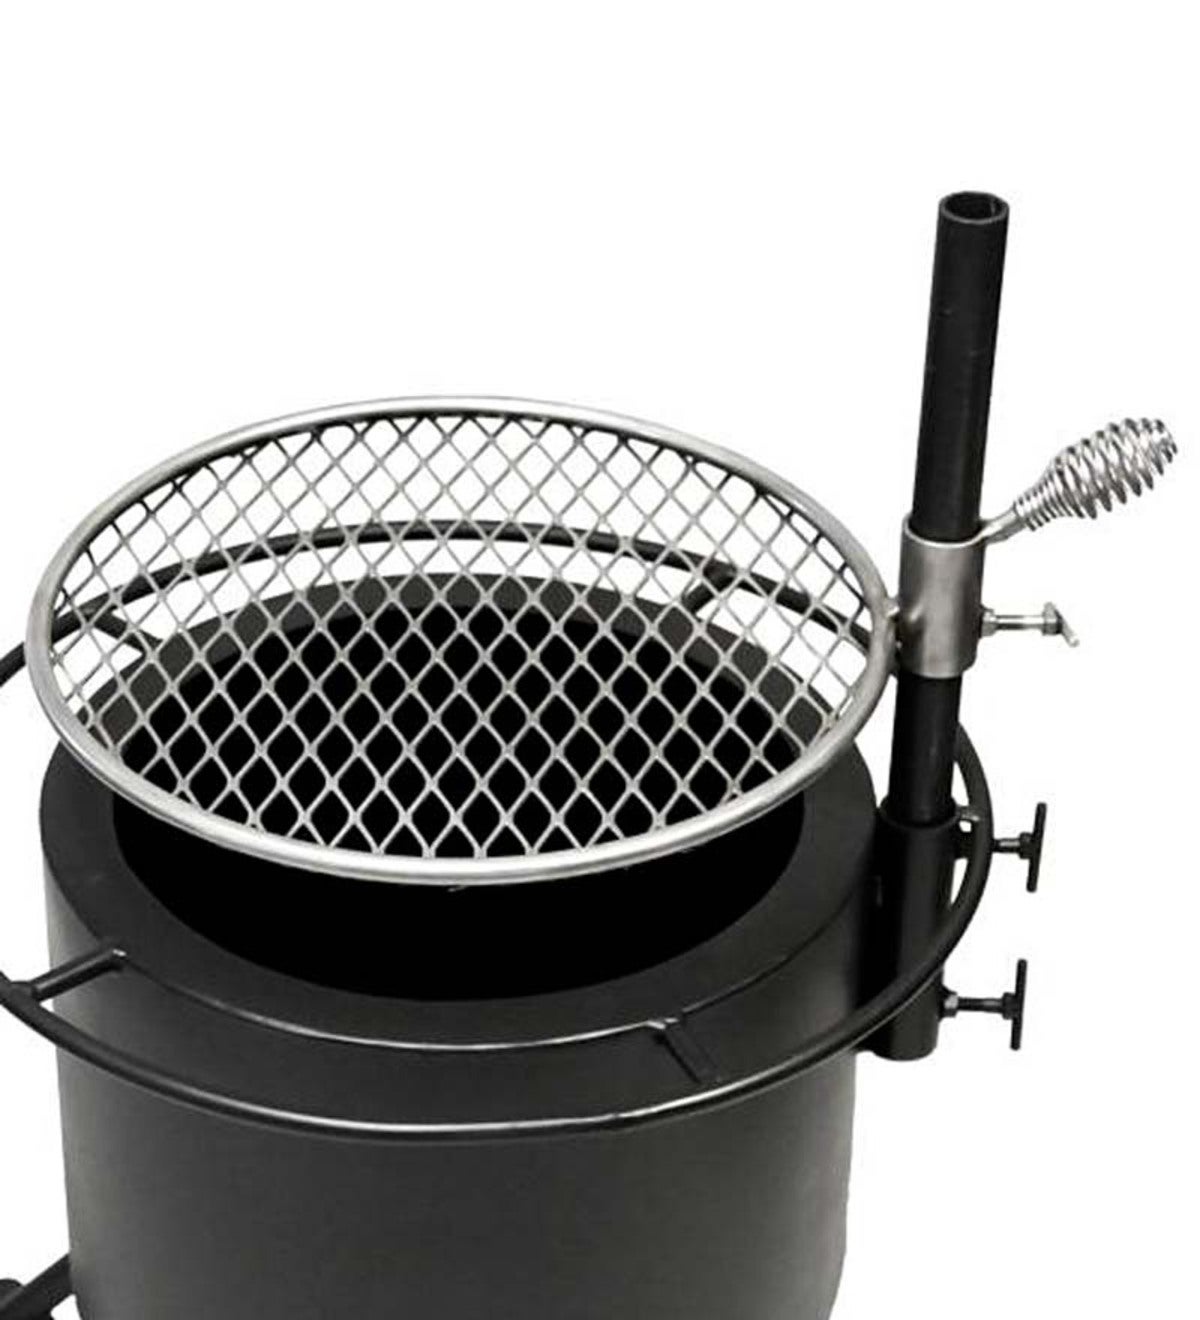 Stainless Steel Fire Pit Grill, Stainless Steel Fire Pit Grate